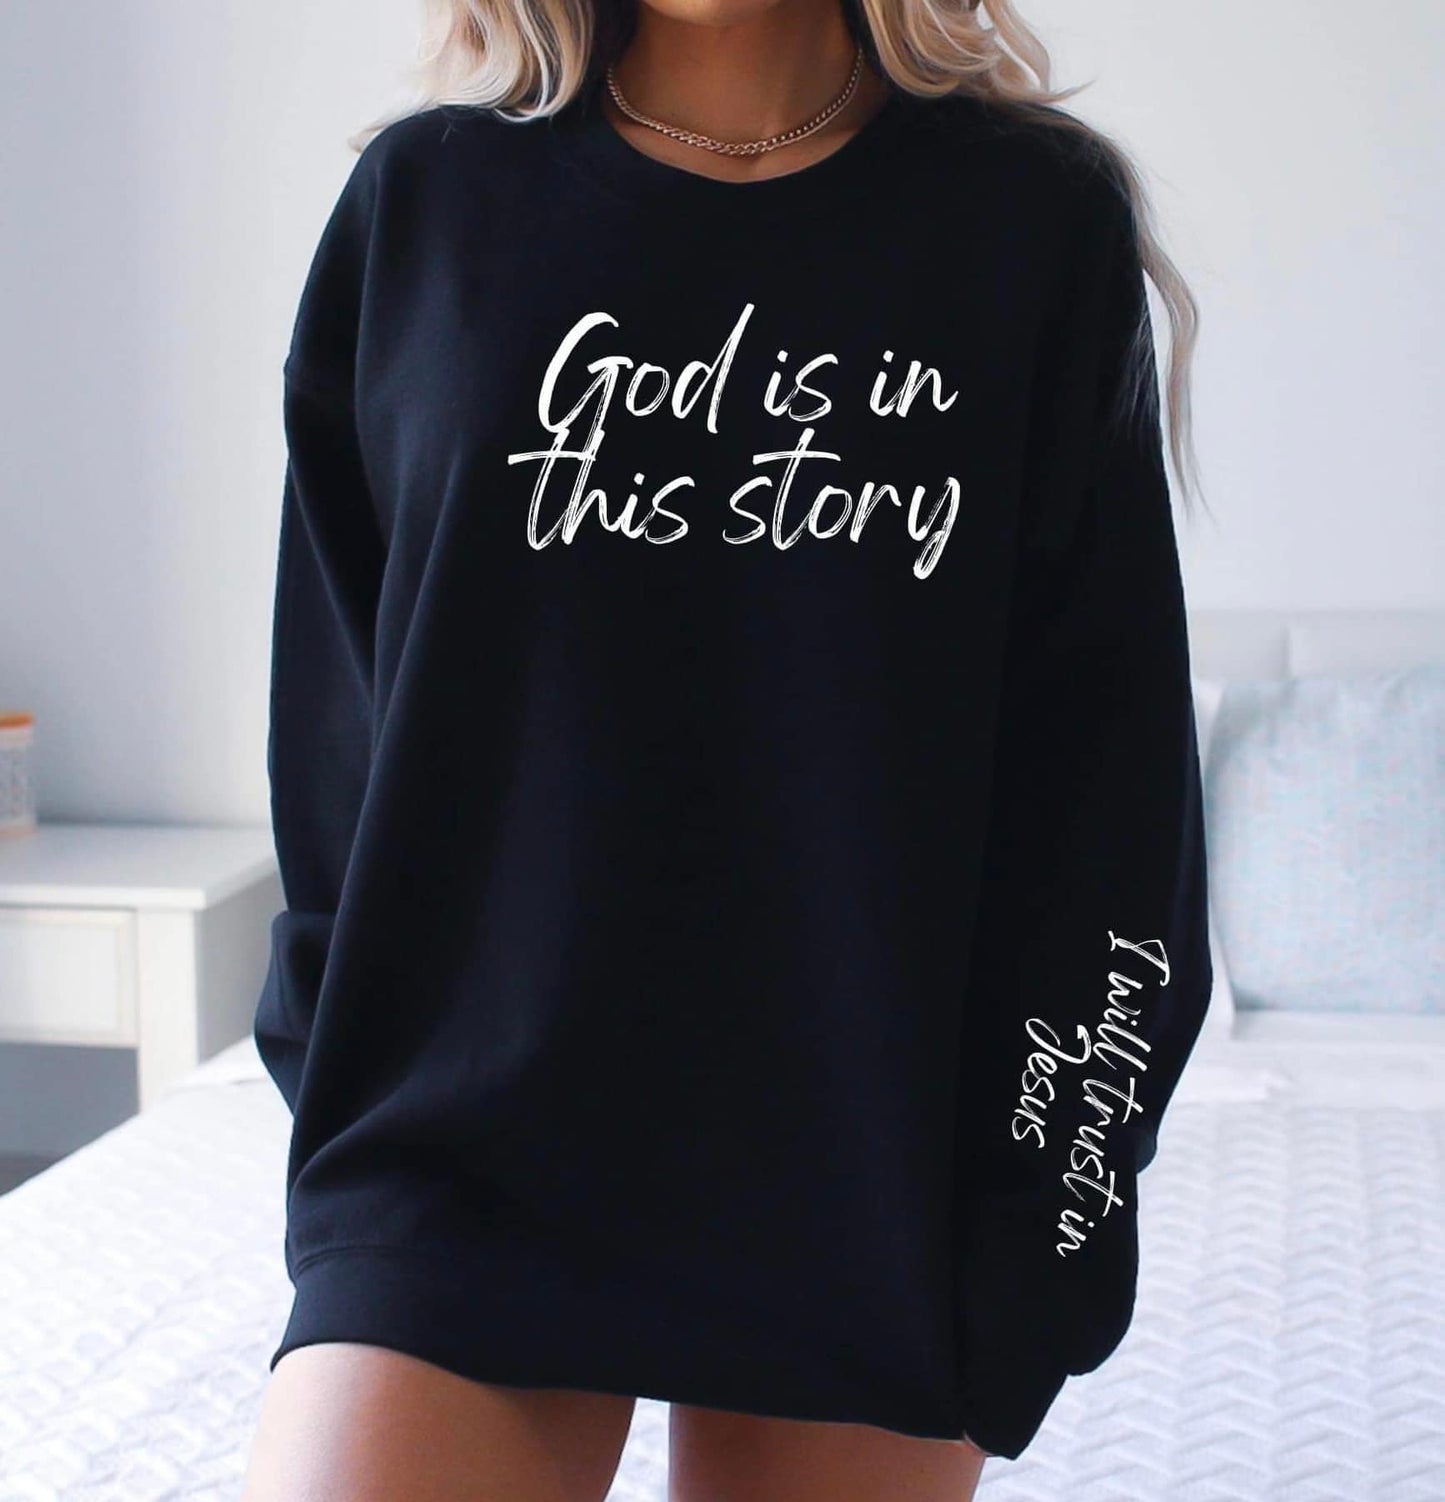 God Is In This Story With Sleeve Design